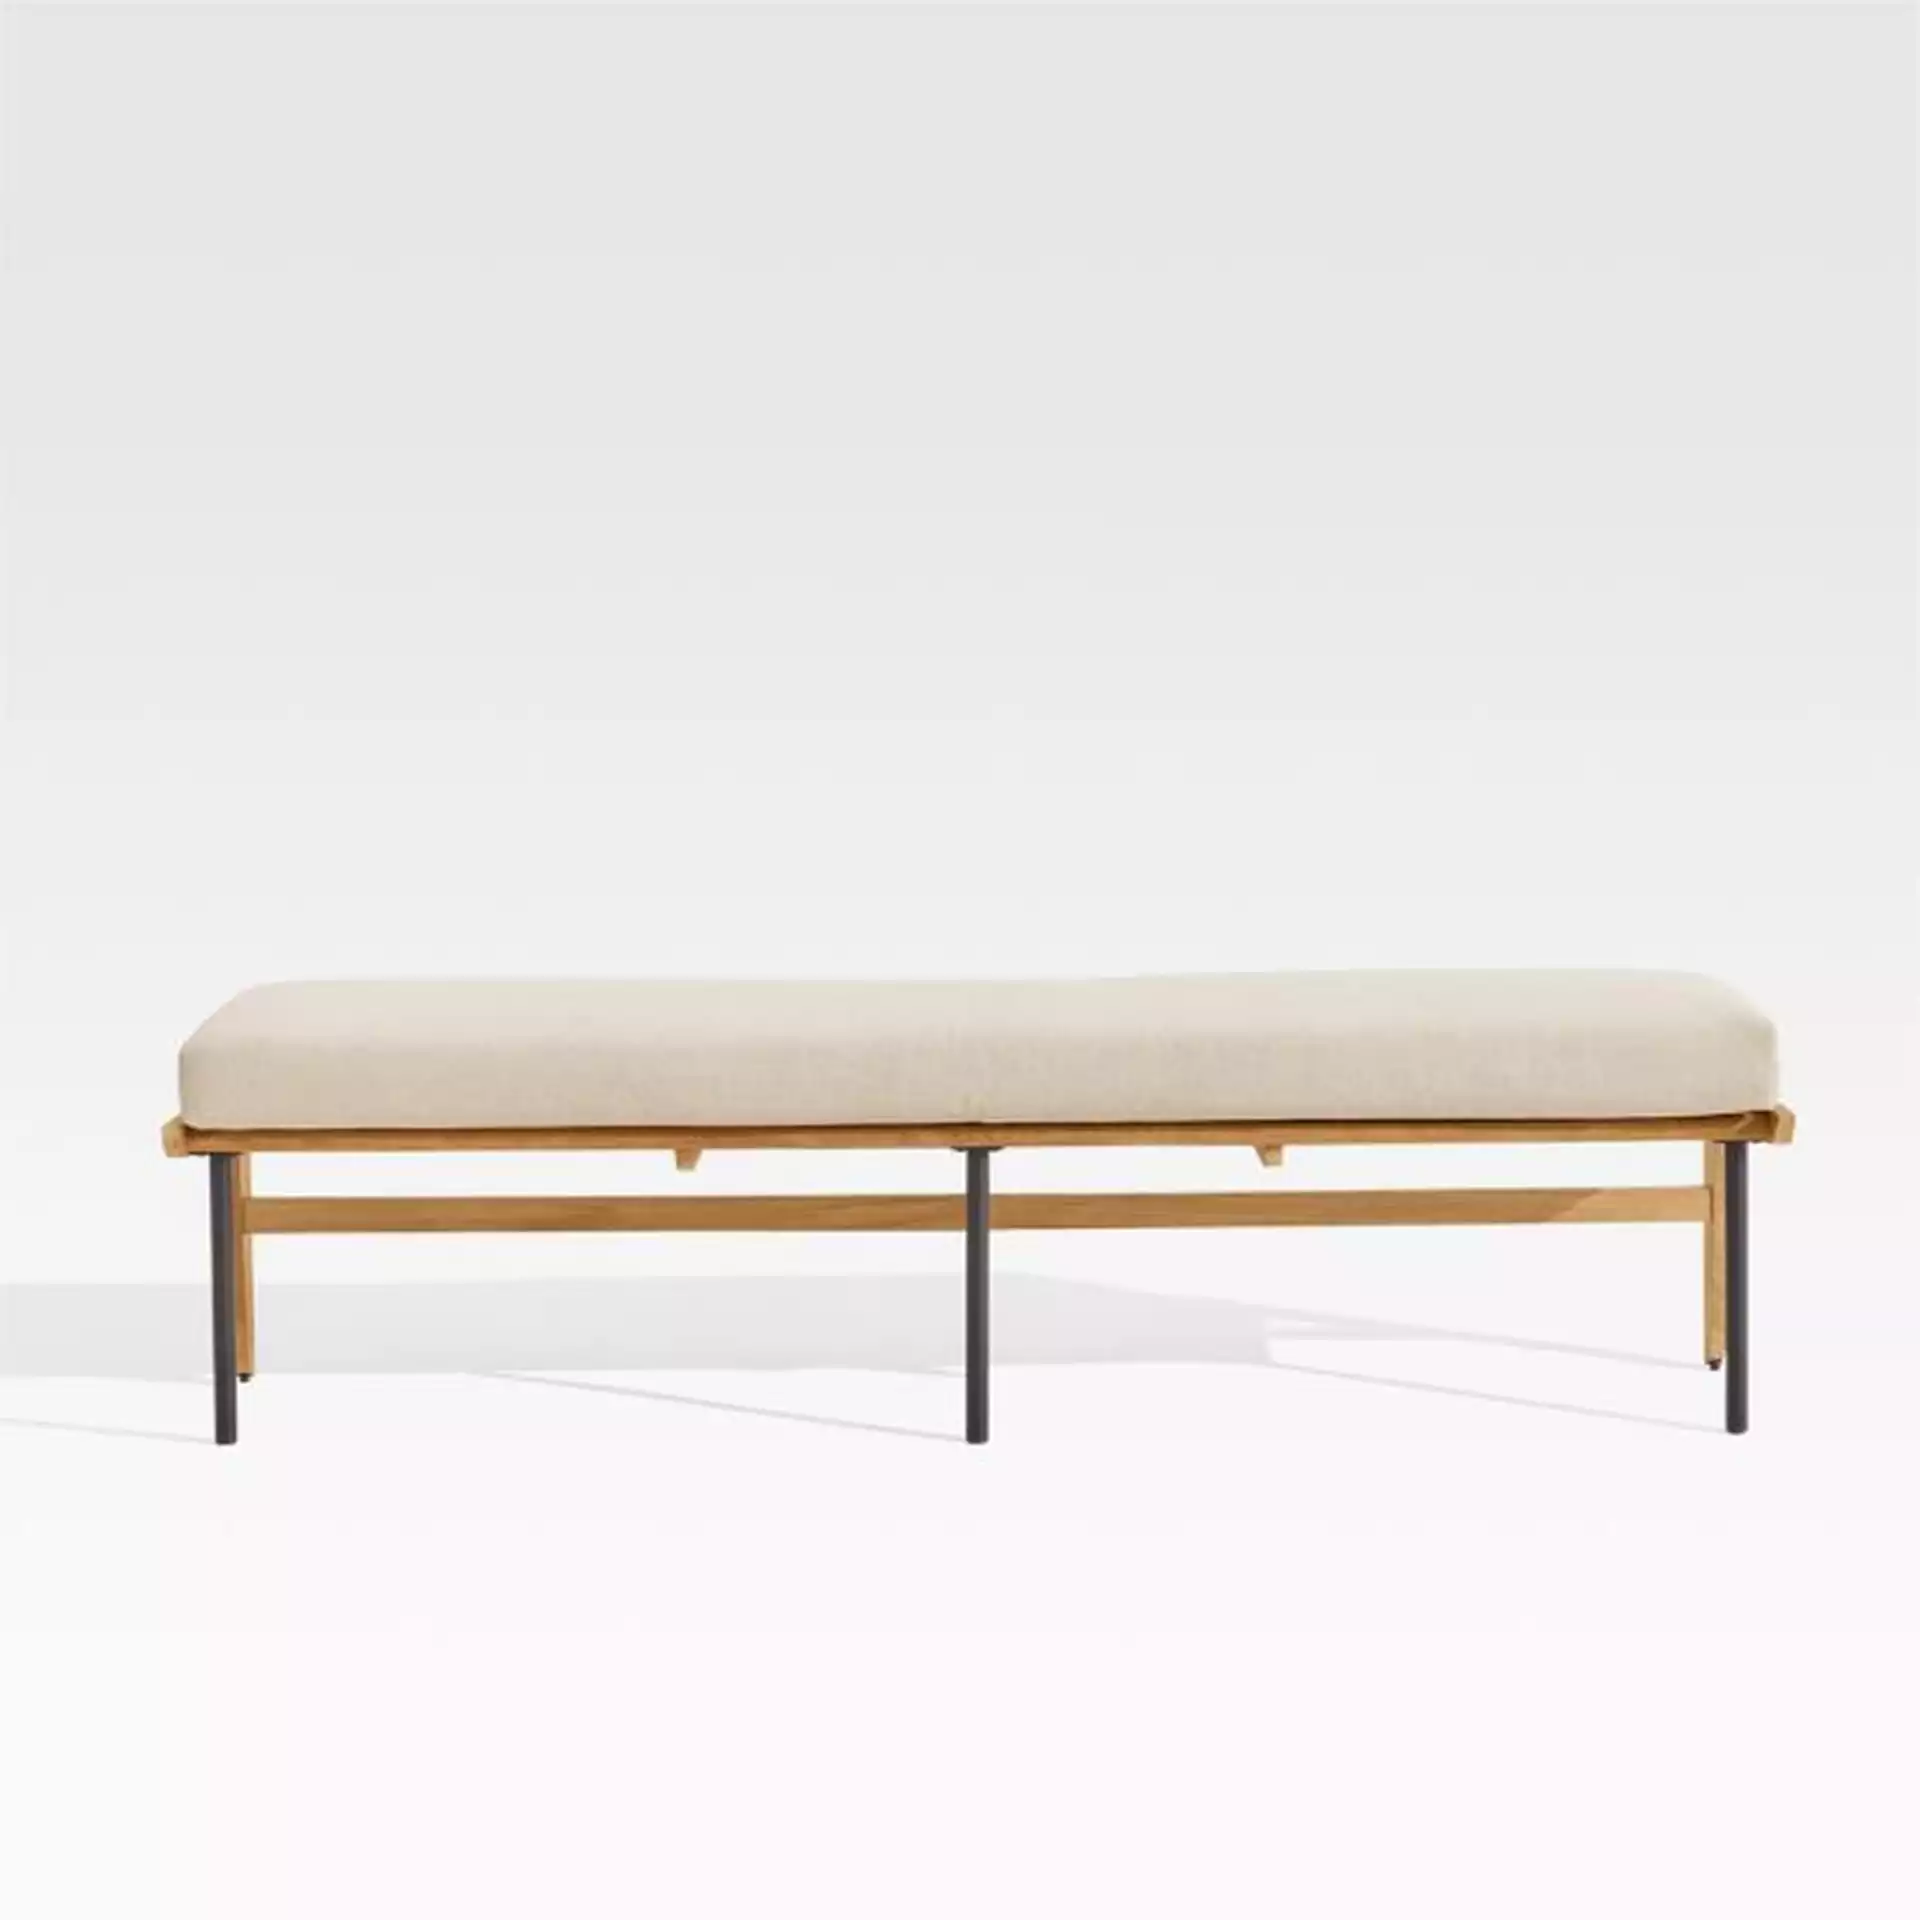 Kinney Teak Outdoor Dining Bench with Cushion